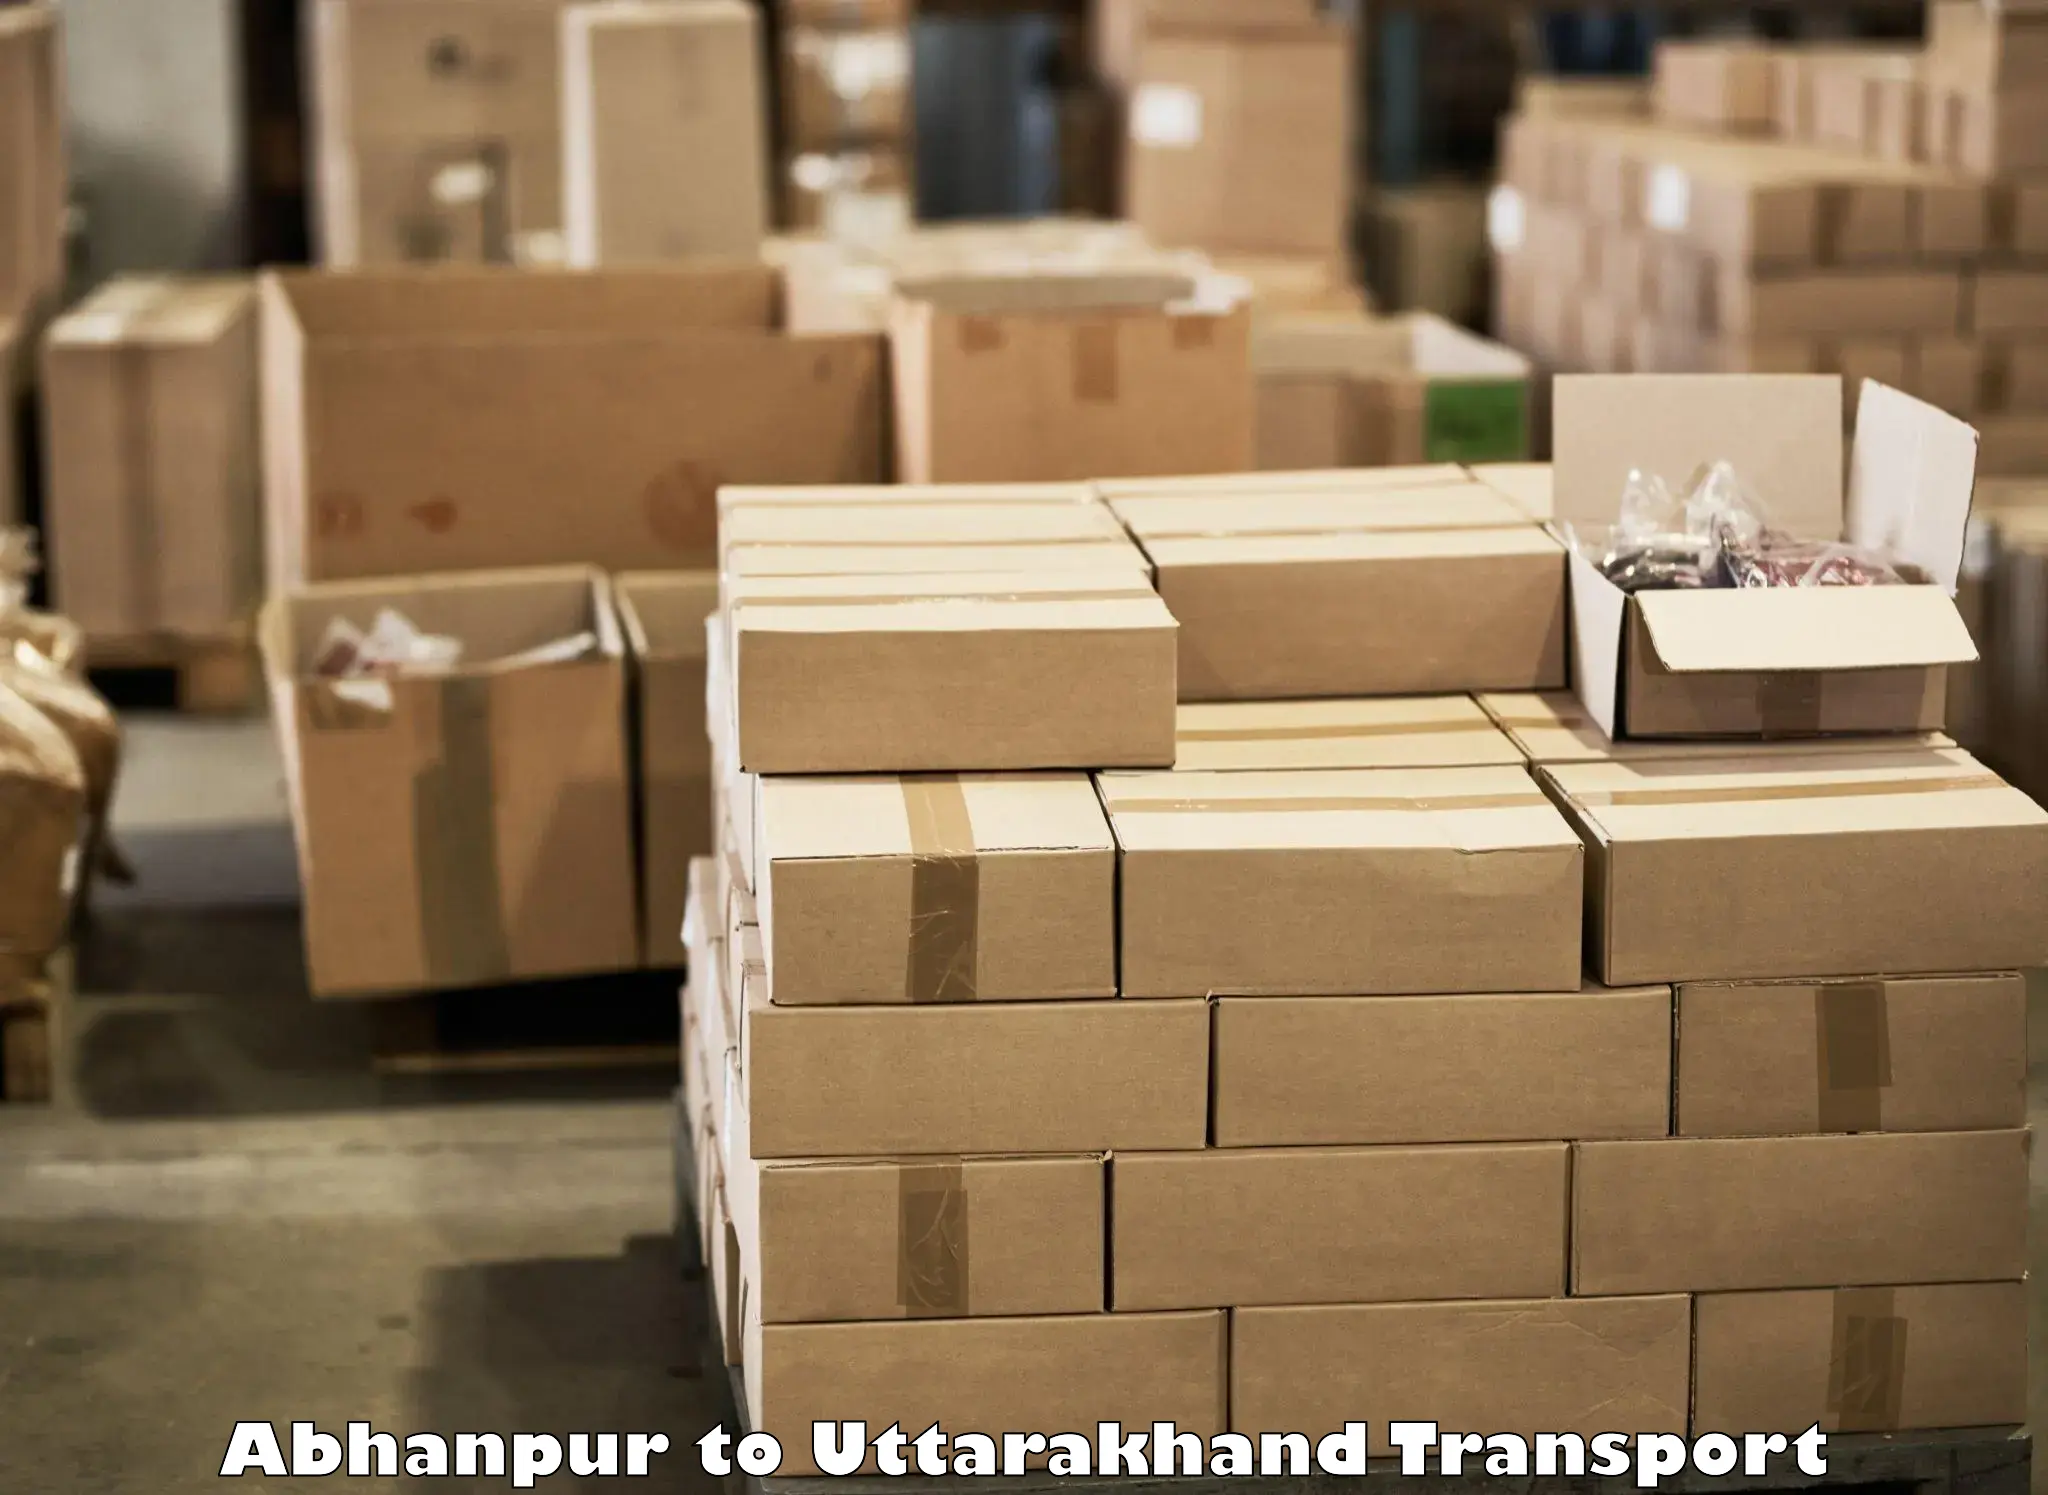 Container transport service Abhanpur to Uttarakhand